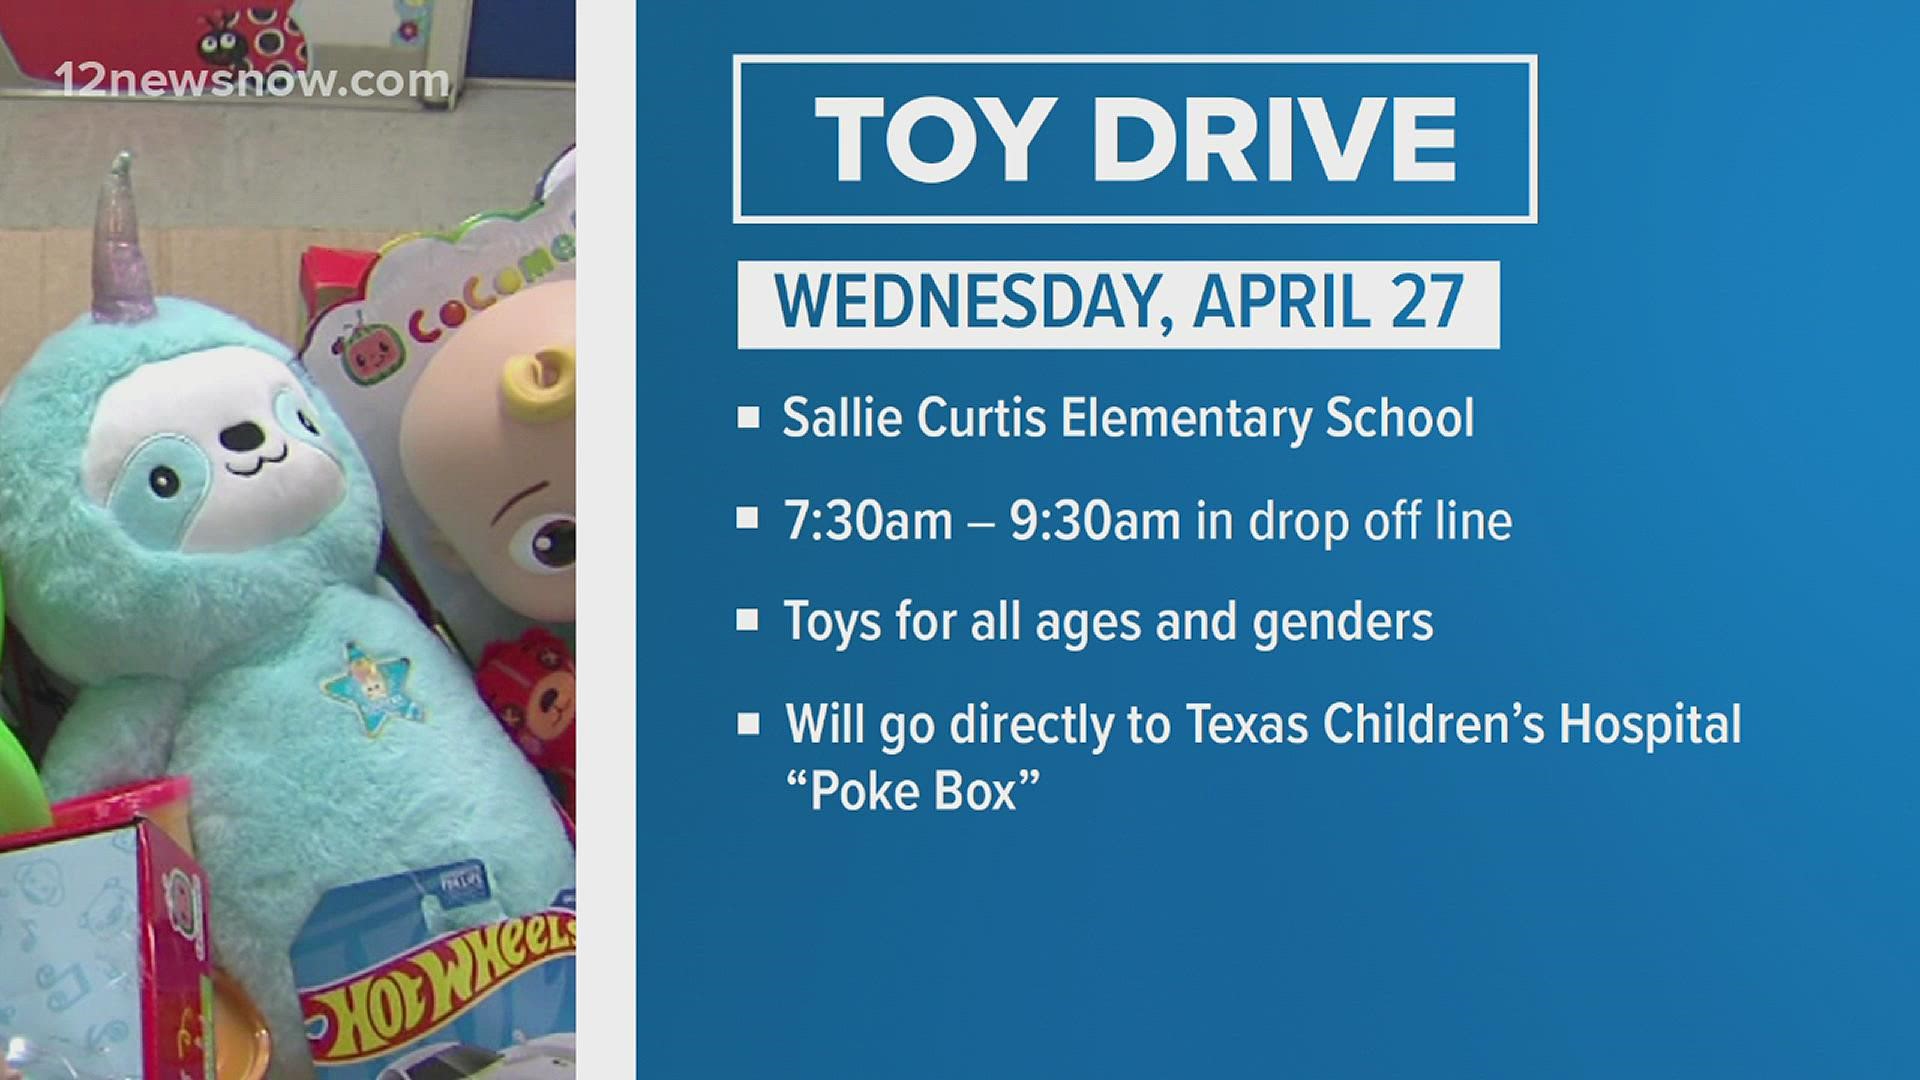 You have a chance to help a kid in need.
Wednesday, April 27 from 7:30 a.m. until 9 a.m., Sallie Curtis Elementary will be accepting toy donations.